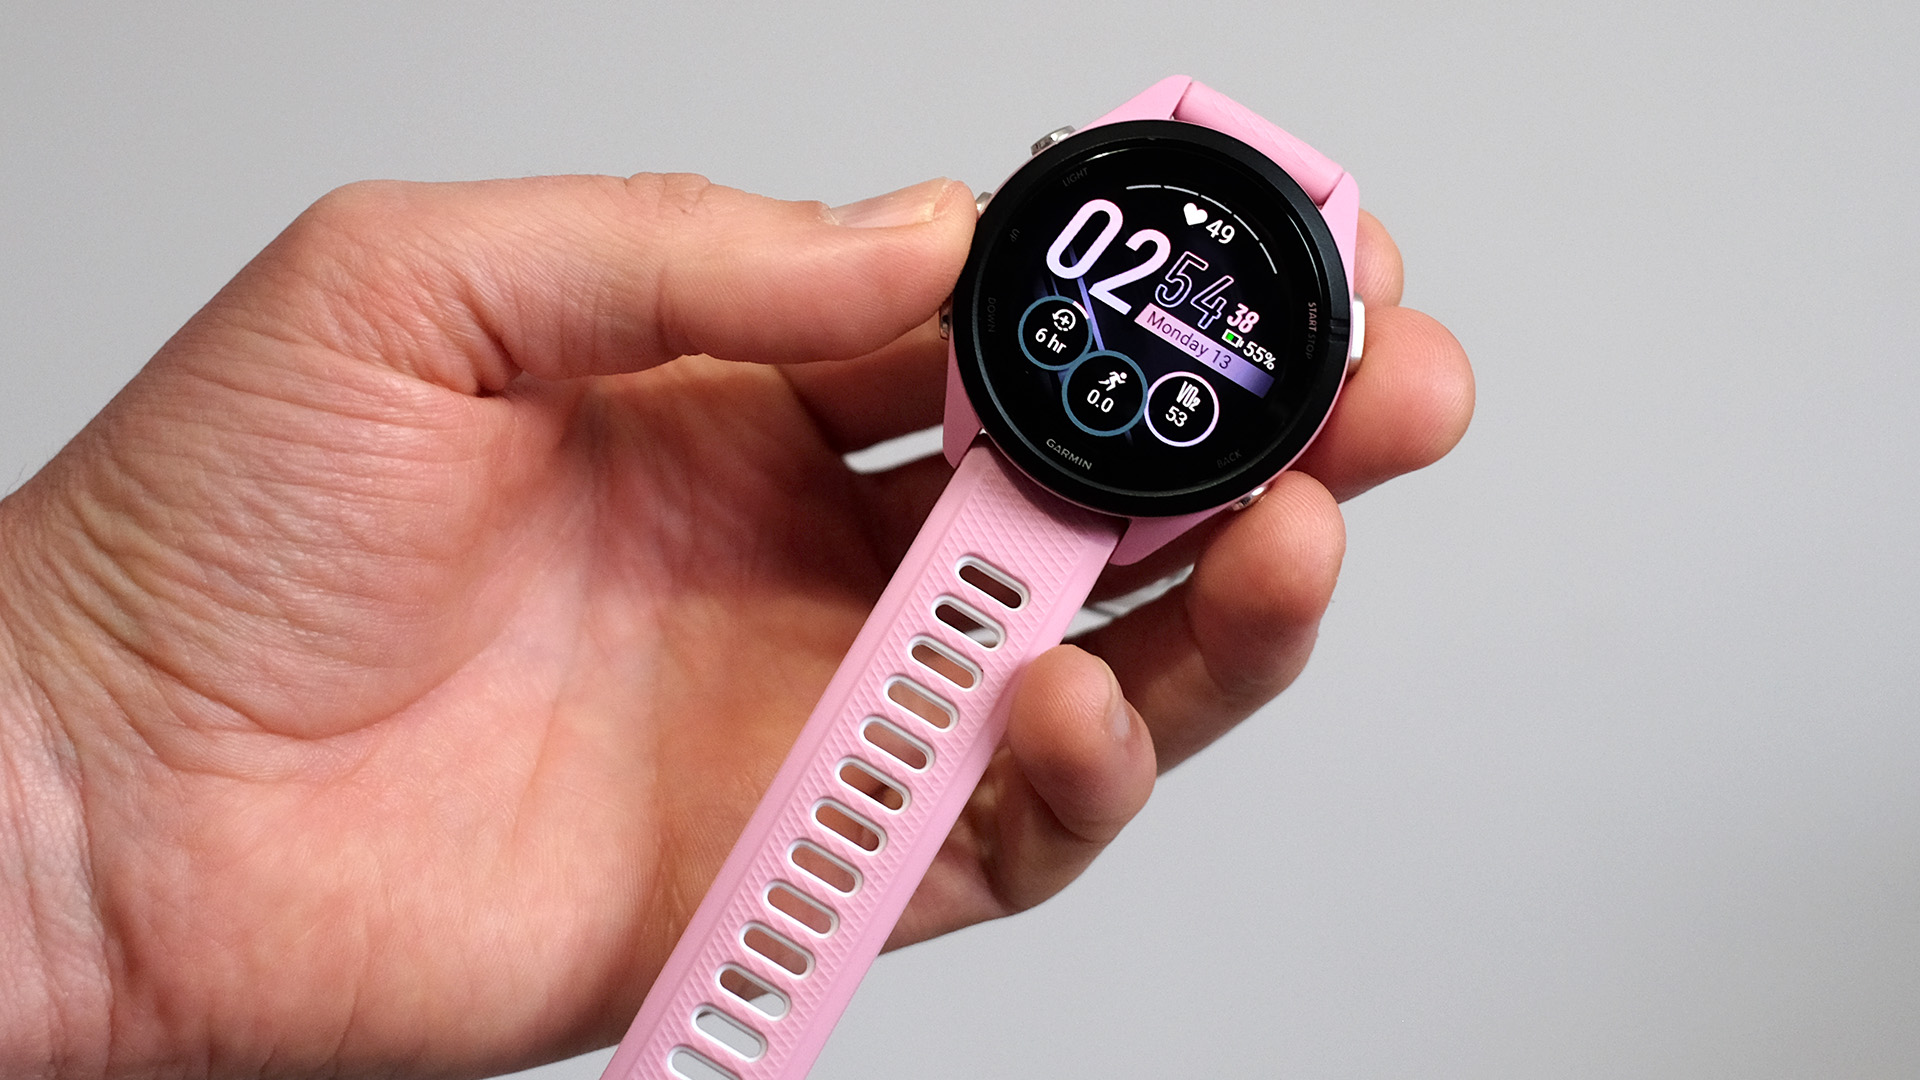 Surprise leak suggests Garmin Forerunner 265 is already in the